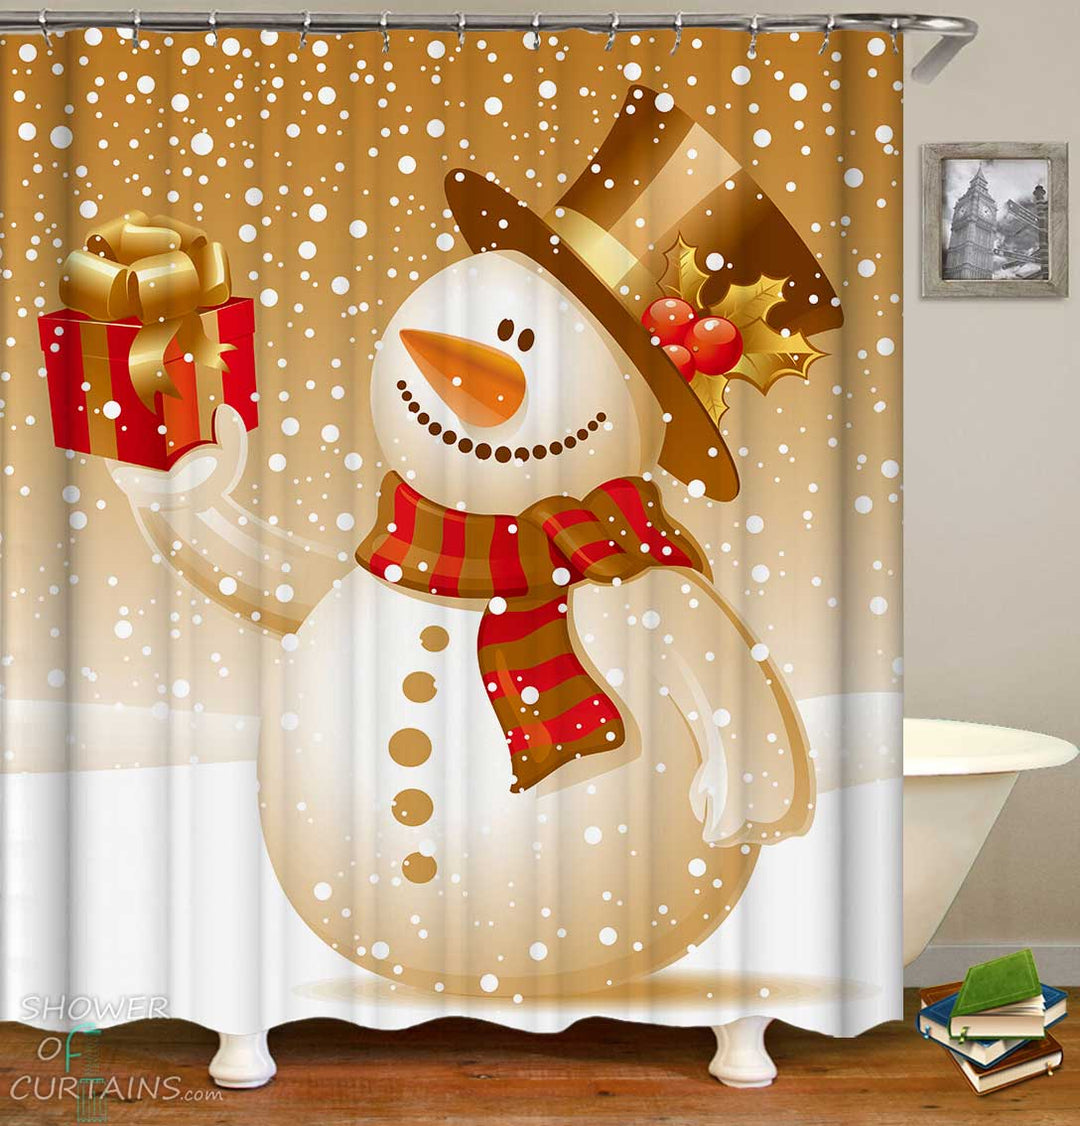 Shower Curtains with Vintage Colored Christmas Snowman